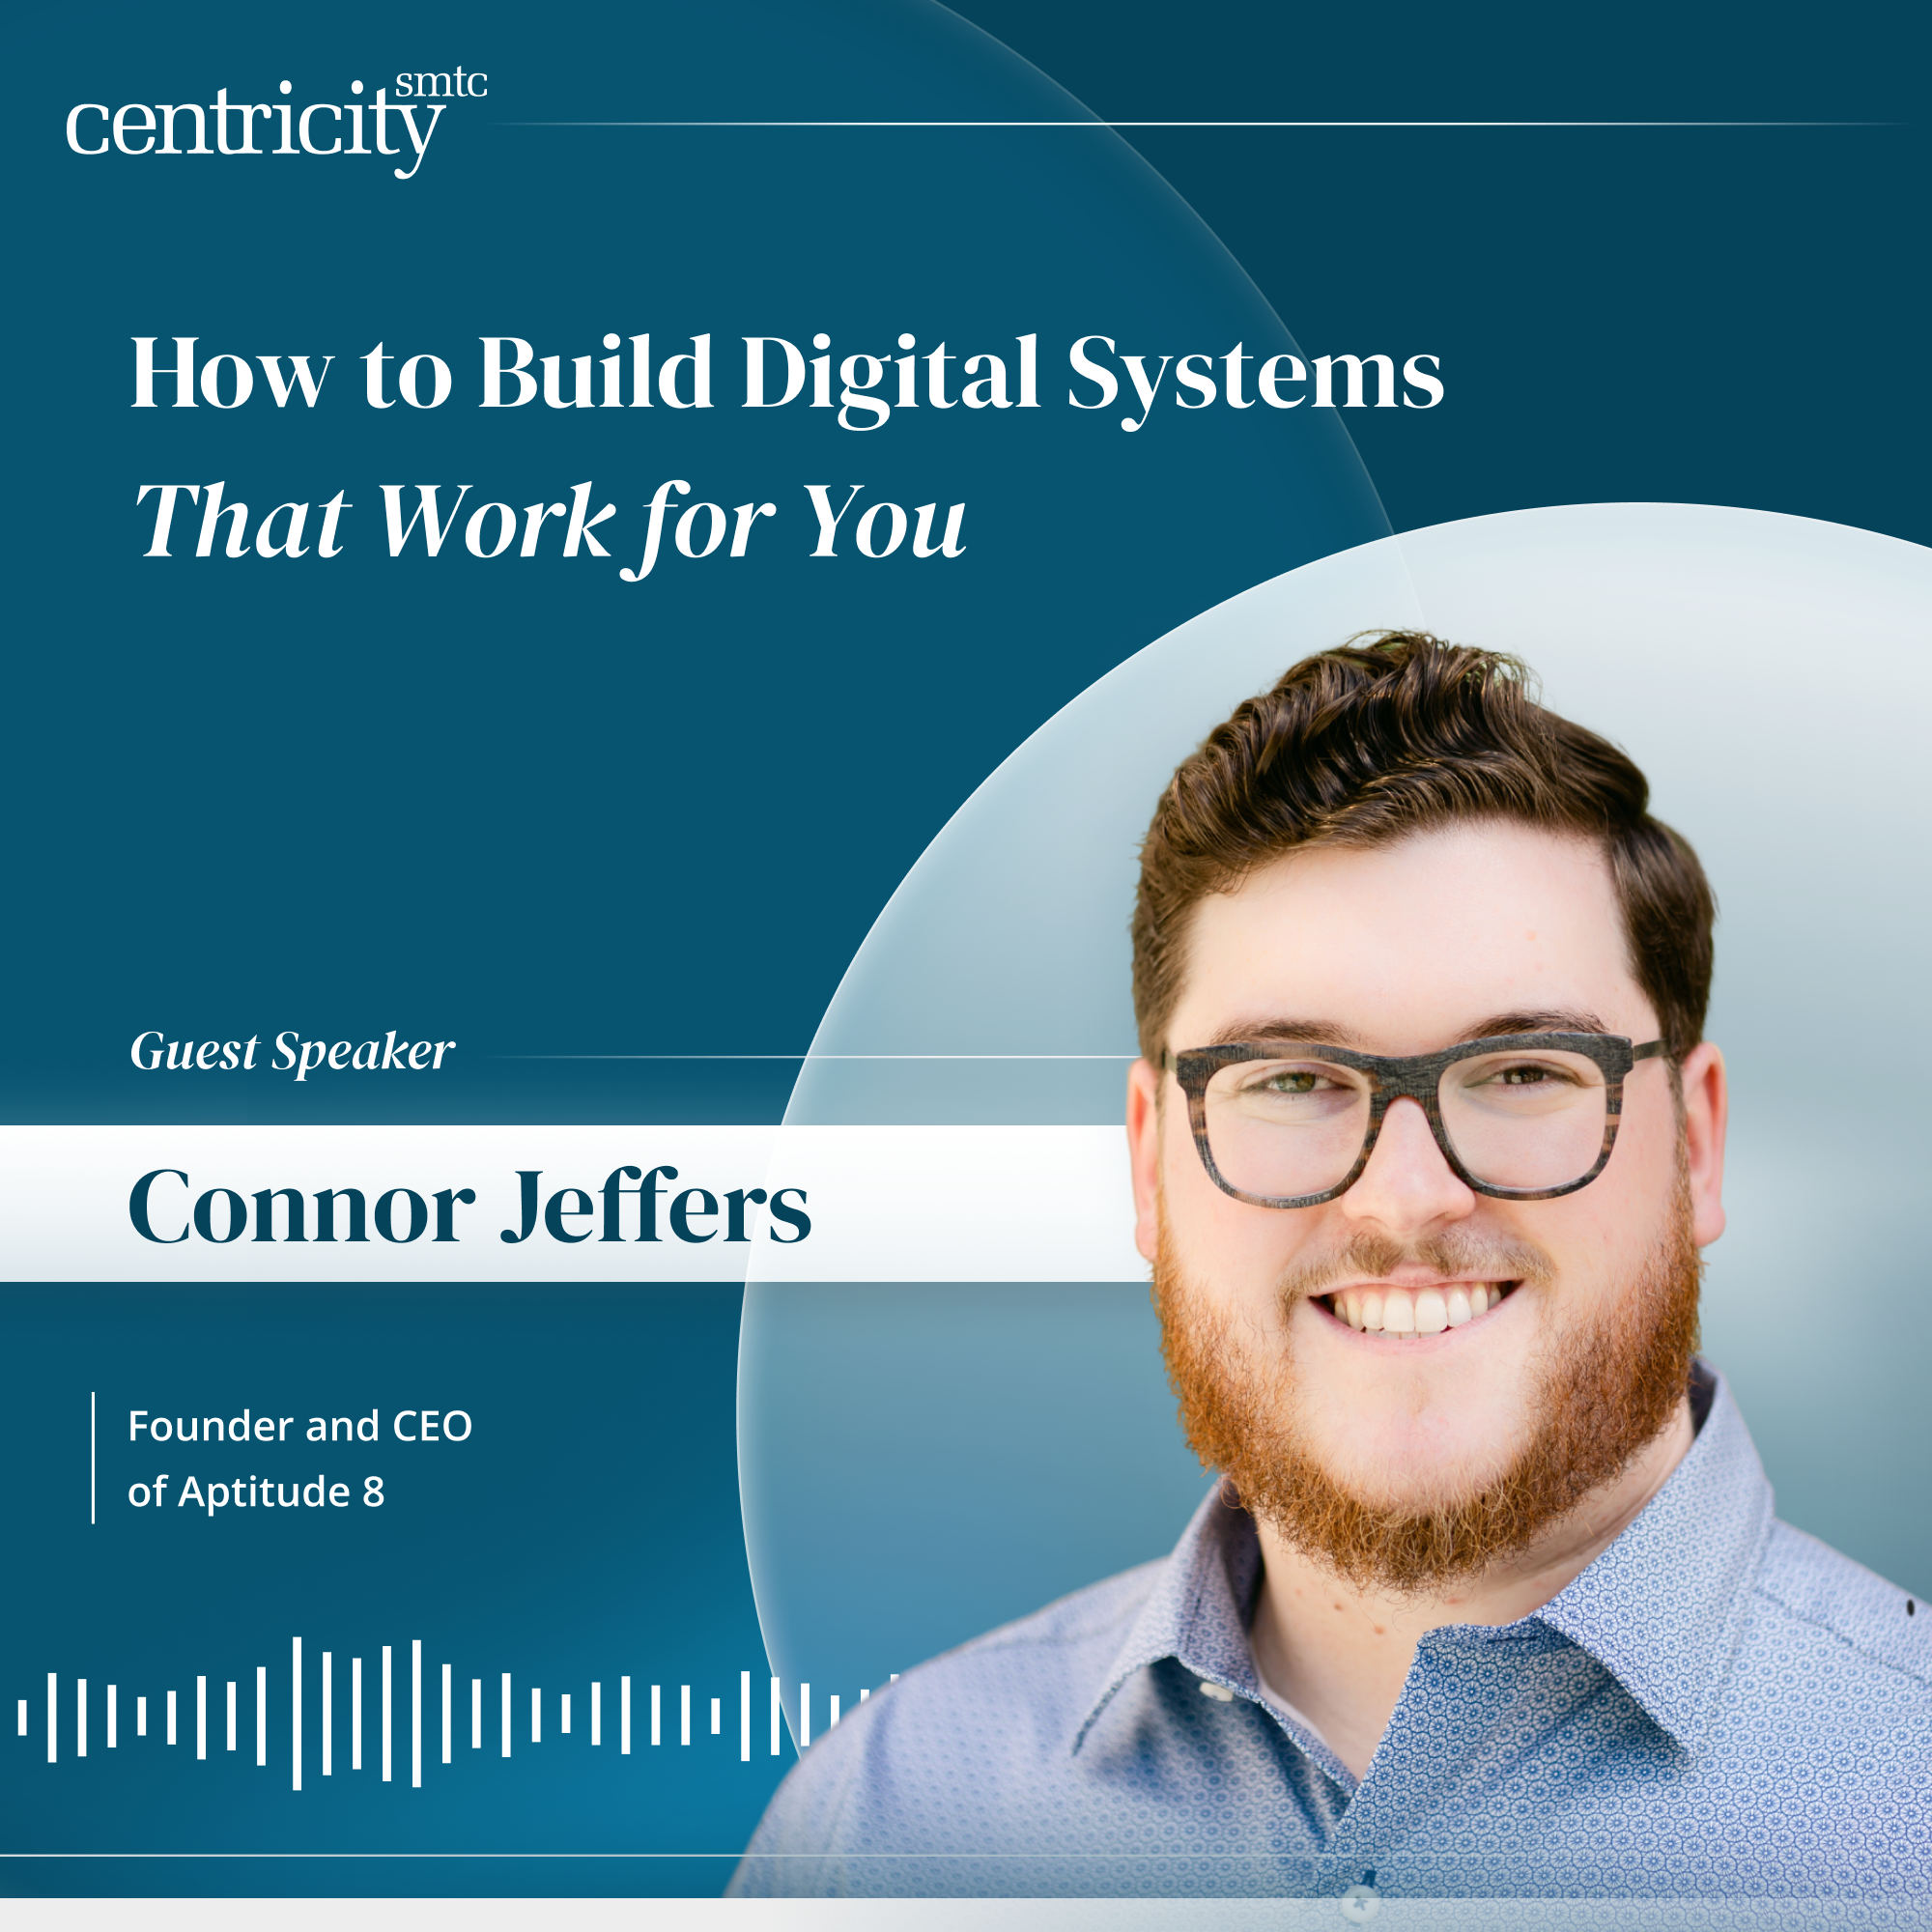 How to Build Digital Systems That Work for You